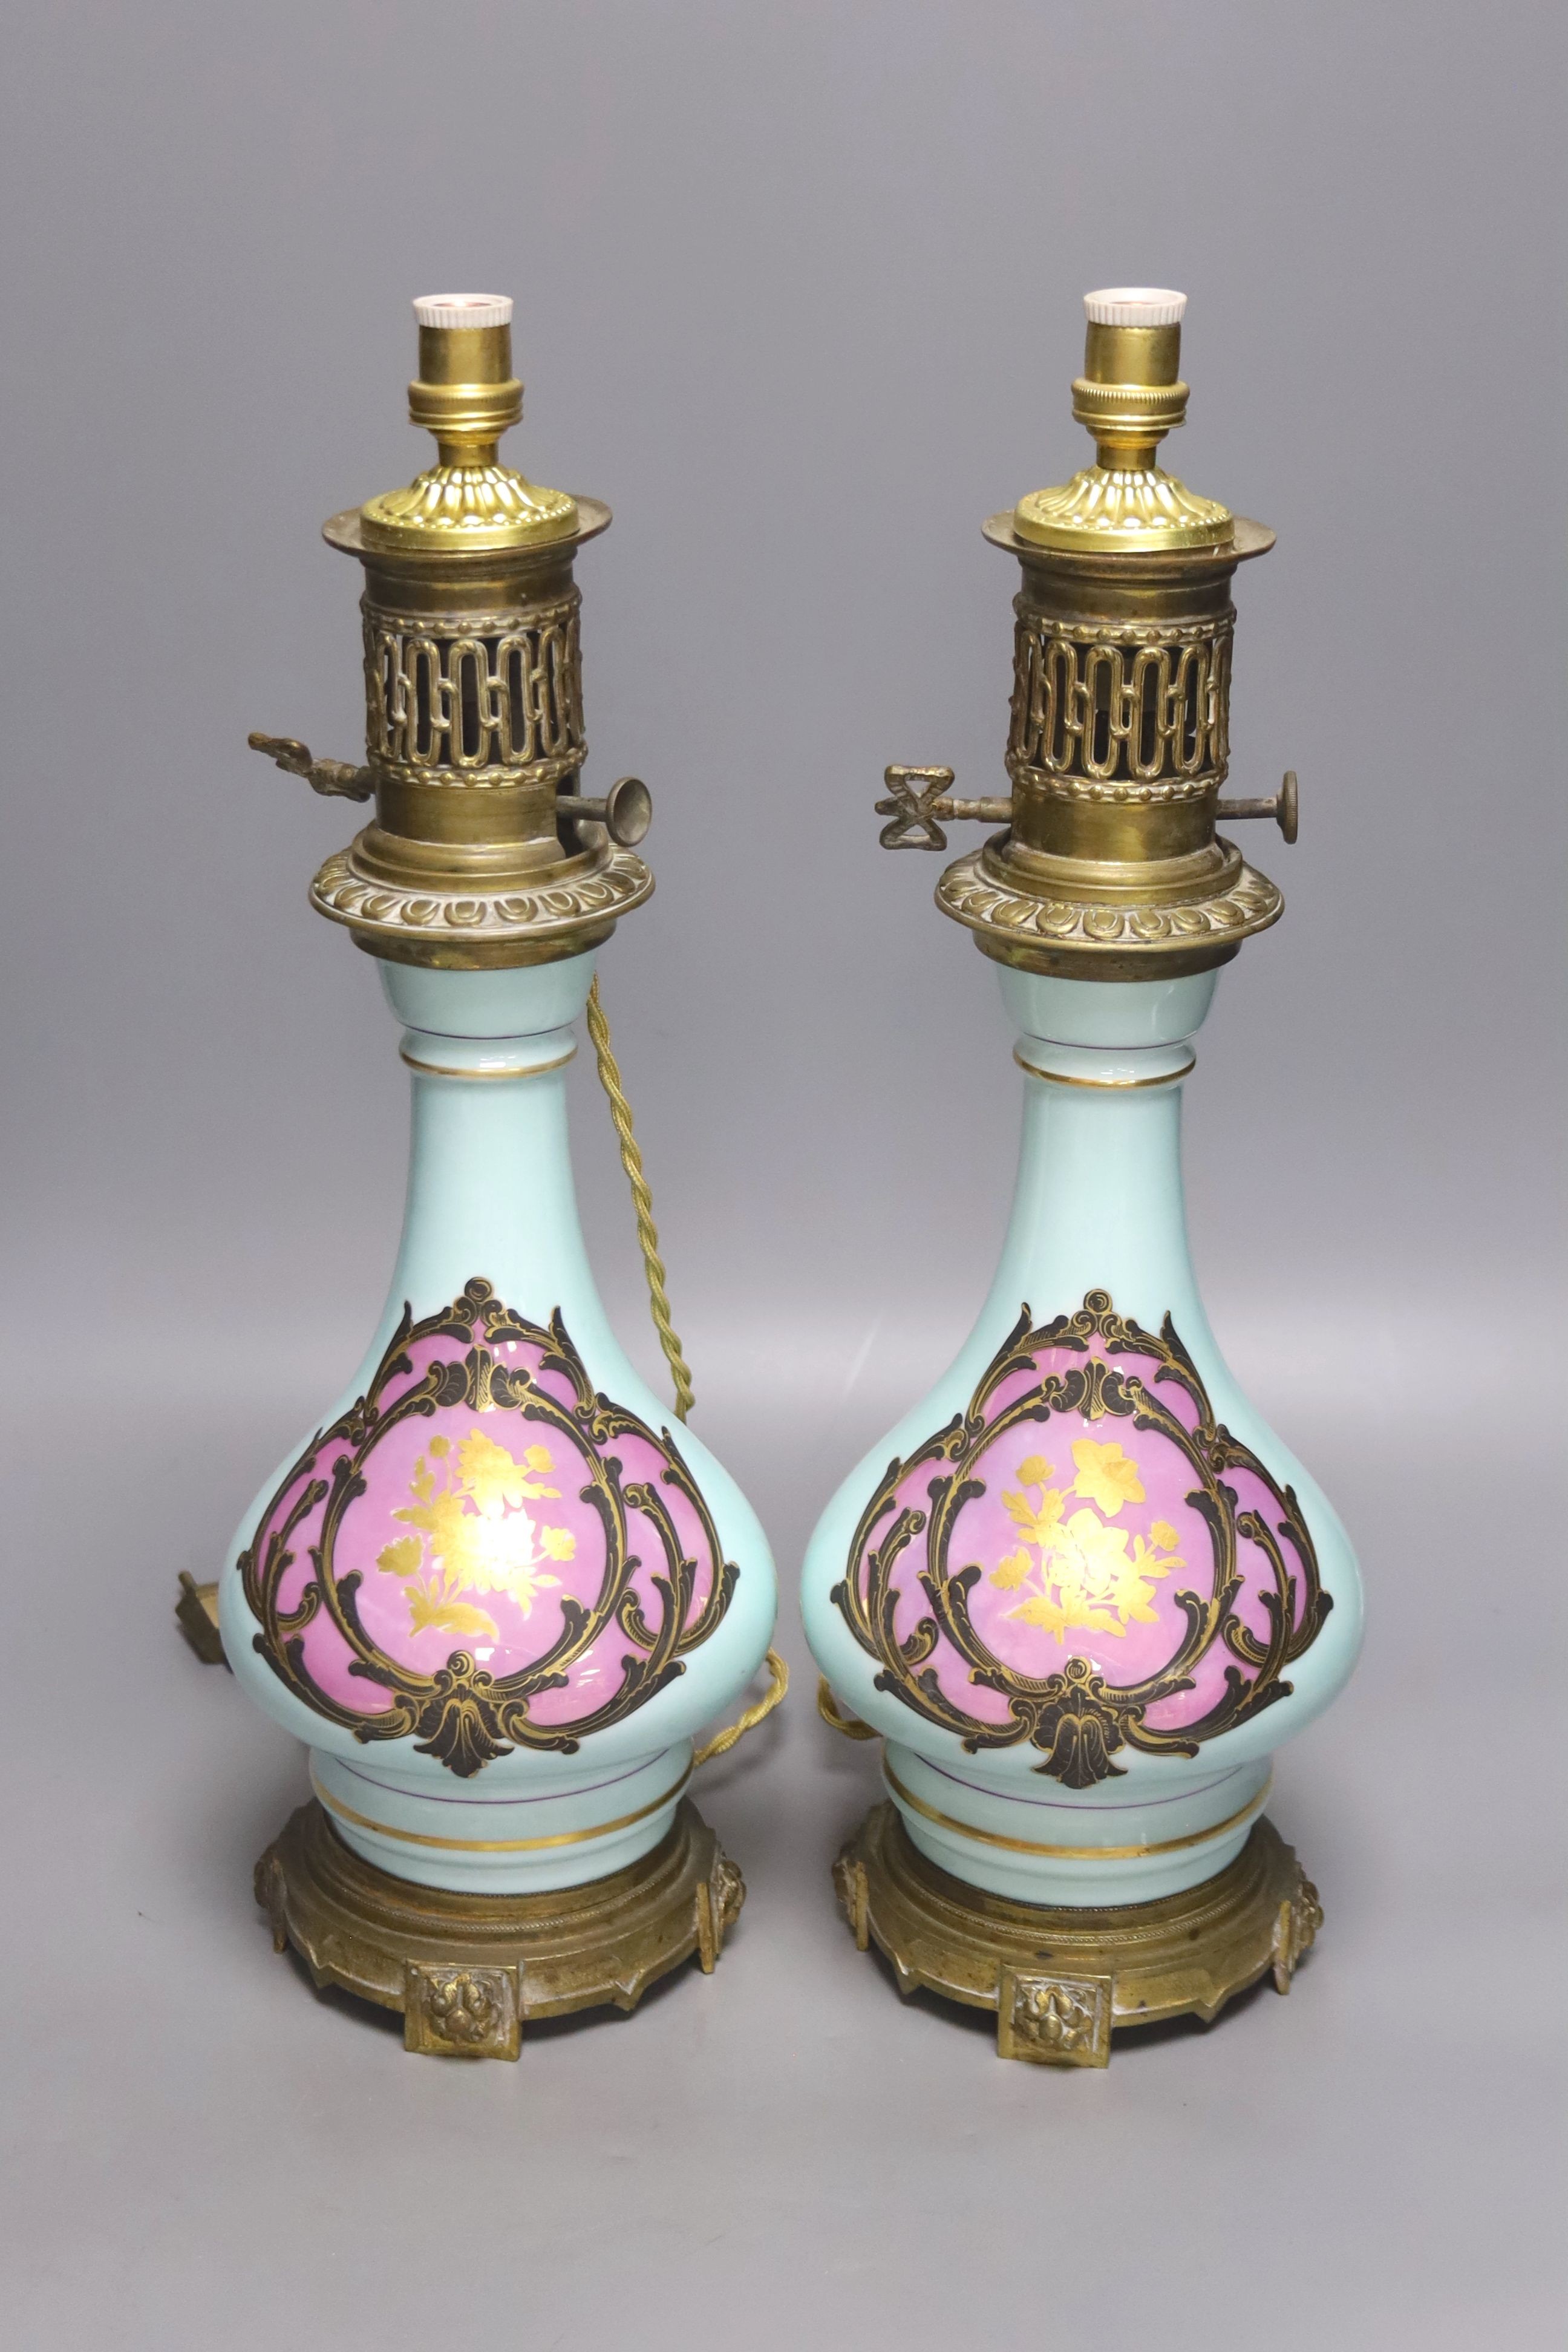 A pair of Napoleon III late 19th century porcelain and ormolu mounted oil lamps, height 40cm